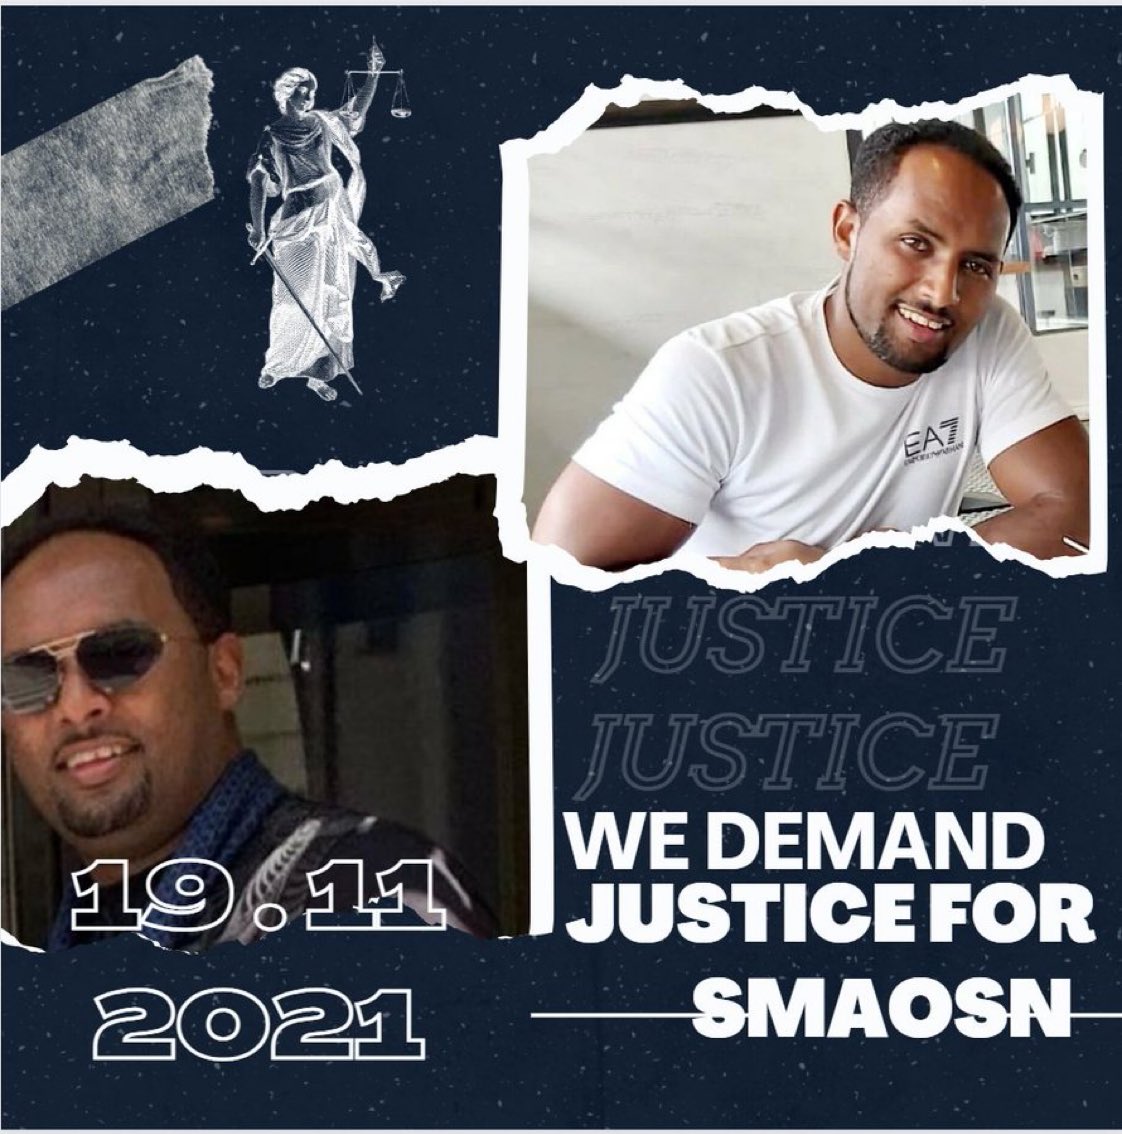 ↪Today,we stand united,5 days from 2 years of silence. It's time for accountability,transparency,and the release of Samson Teklemichael. Justice and truth shall prevail. #2YearsTooLong
#Justice4SamsonKE 
@WilliamsRuto 
@MamaRachelRuto 
@DemekeHasen 
@mfaethiopia